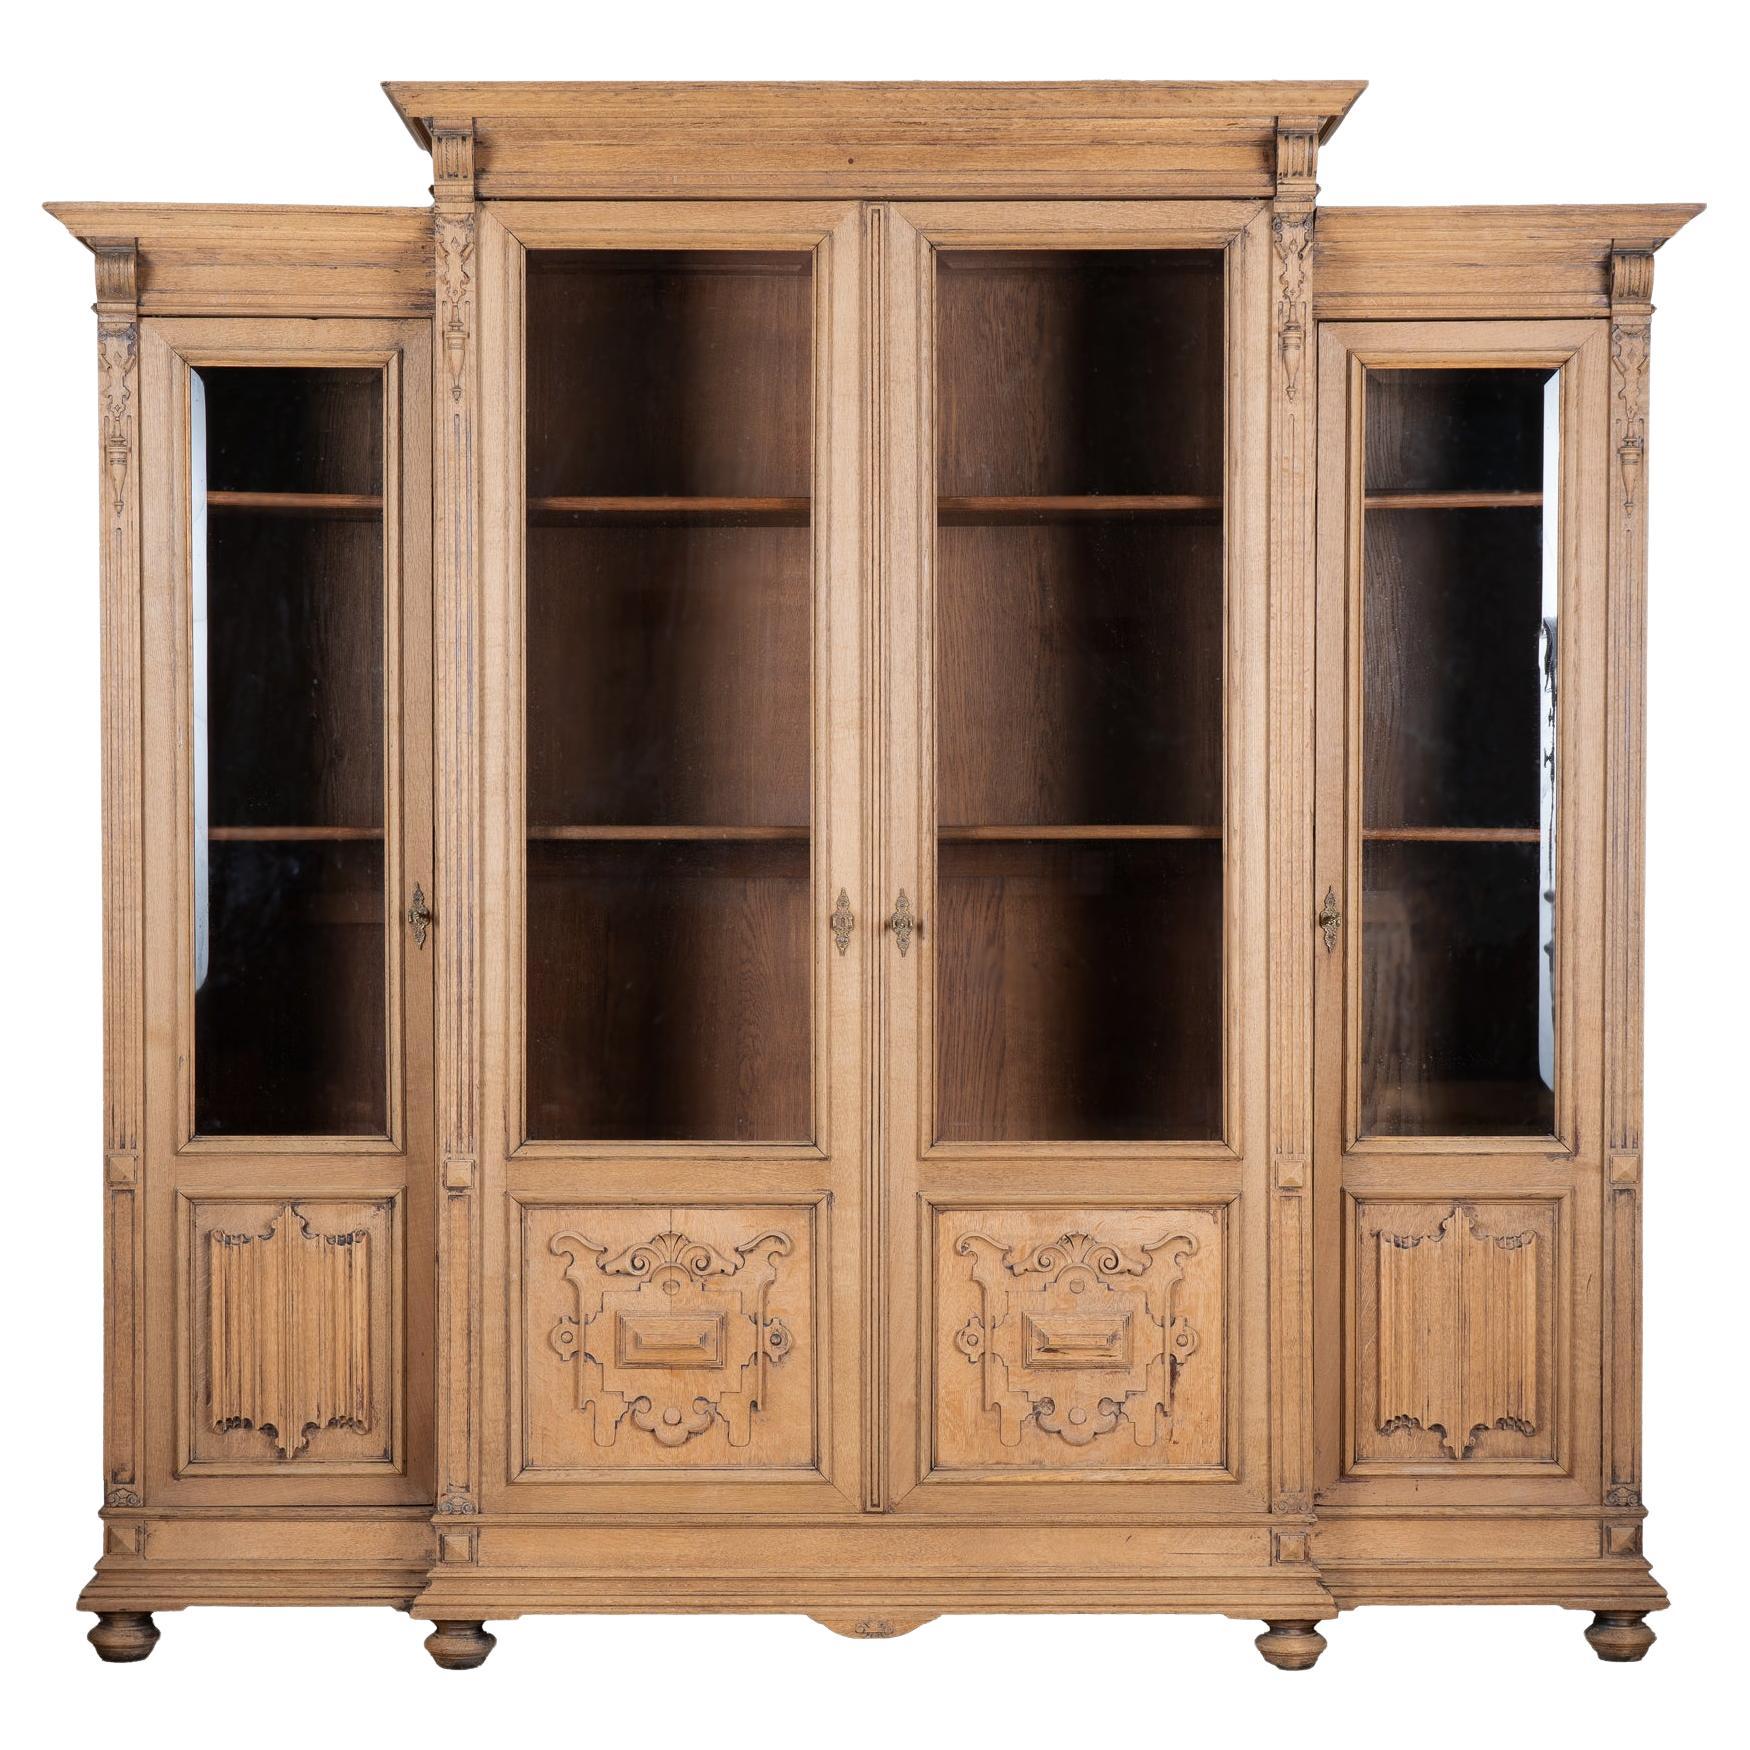 French Bleached Oak Bookcase Display Cabinet With Adjustable Shelves, circa 1880